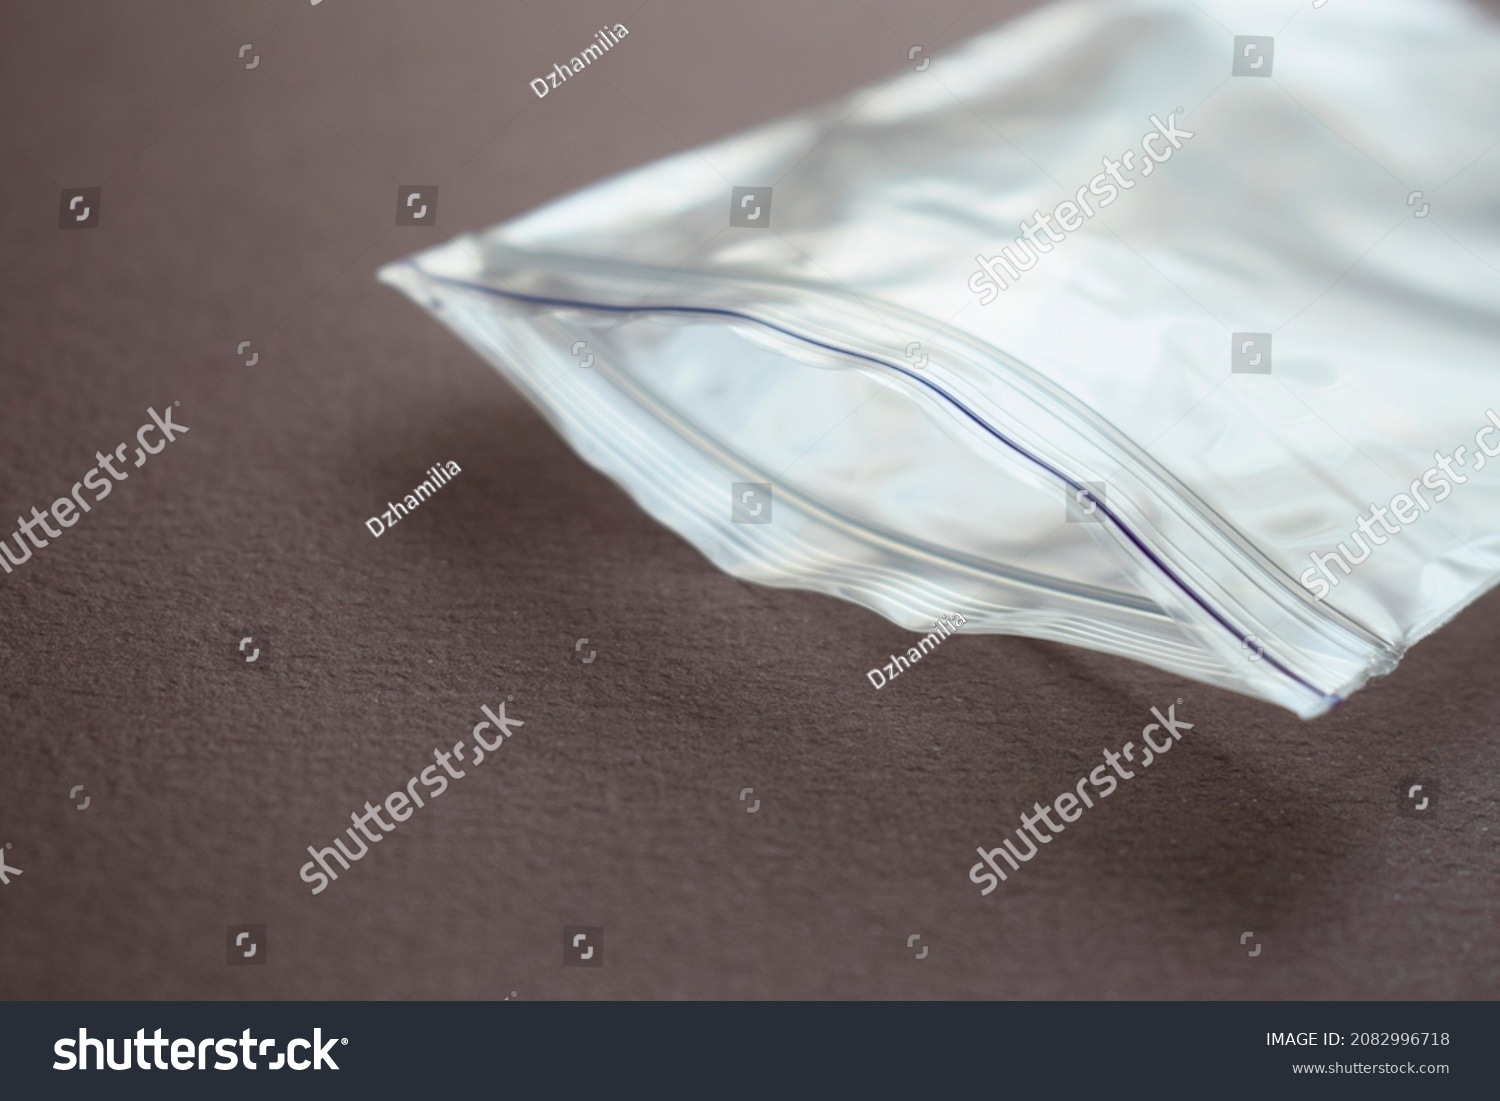 Small transparent plastic bag with zip clasp on a dark background. The clasp is open. #2082996718